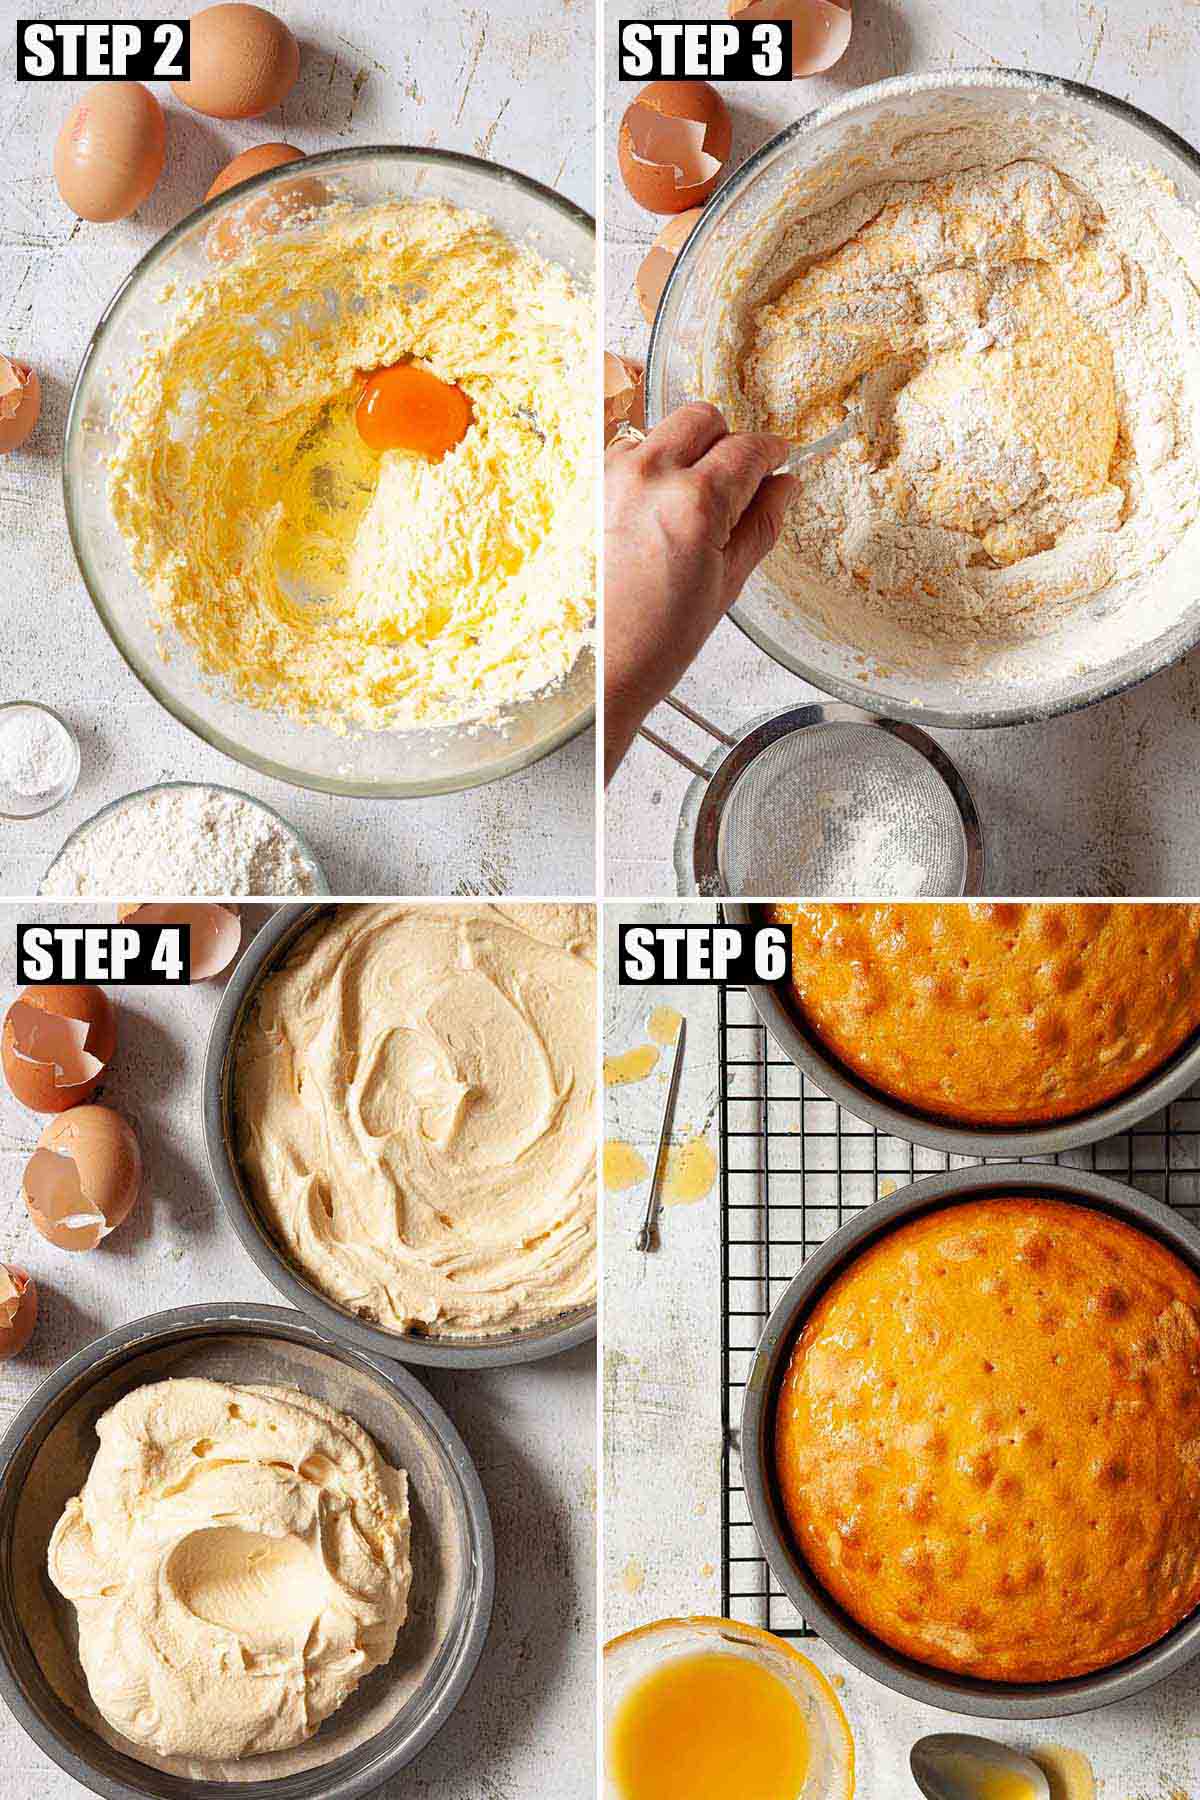 Collage of images showing passion fruit cake being made.